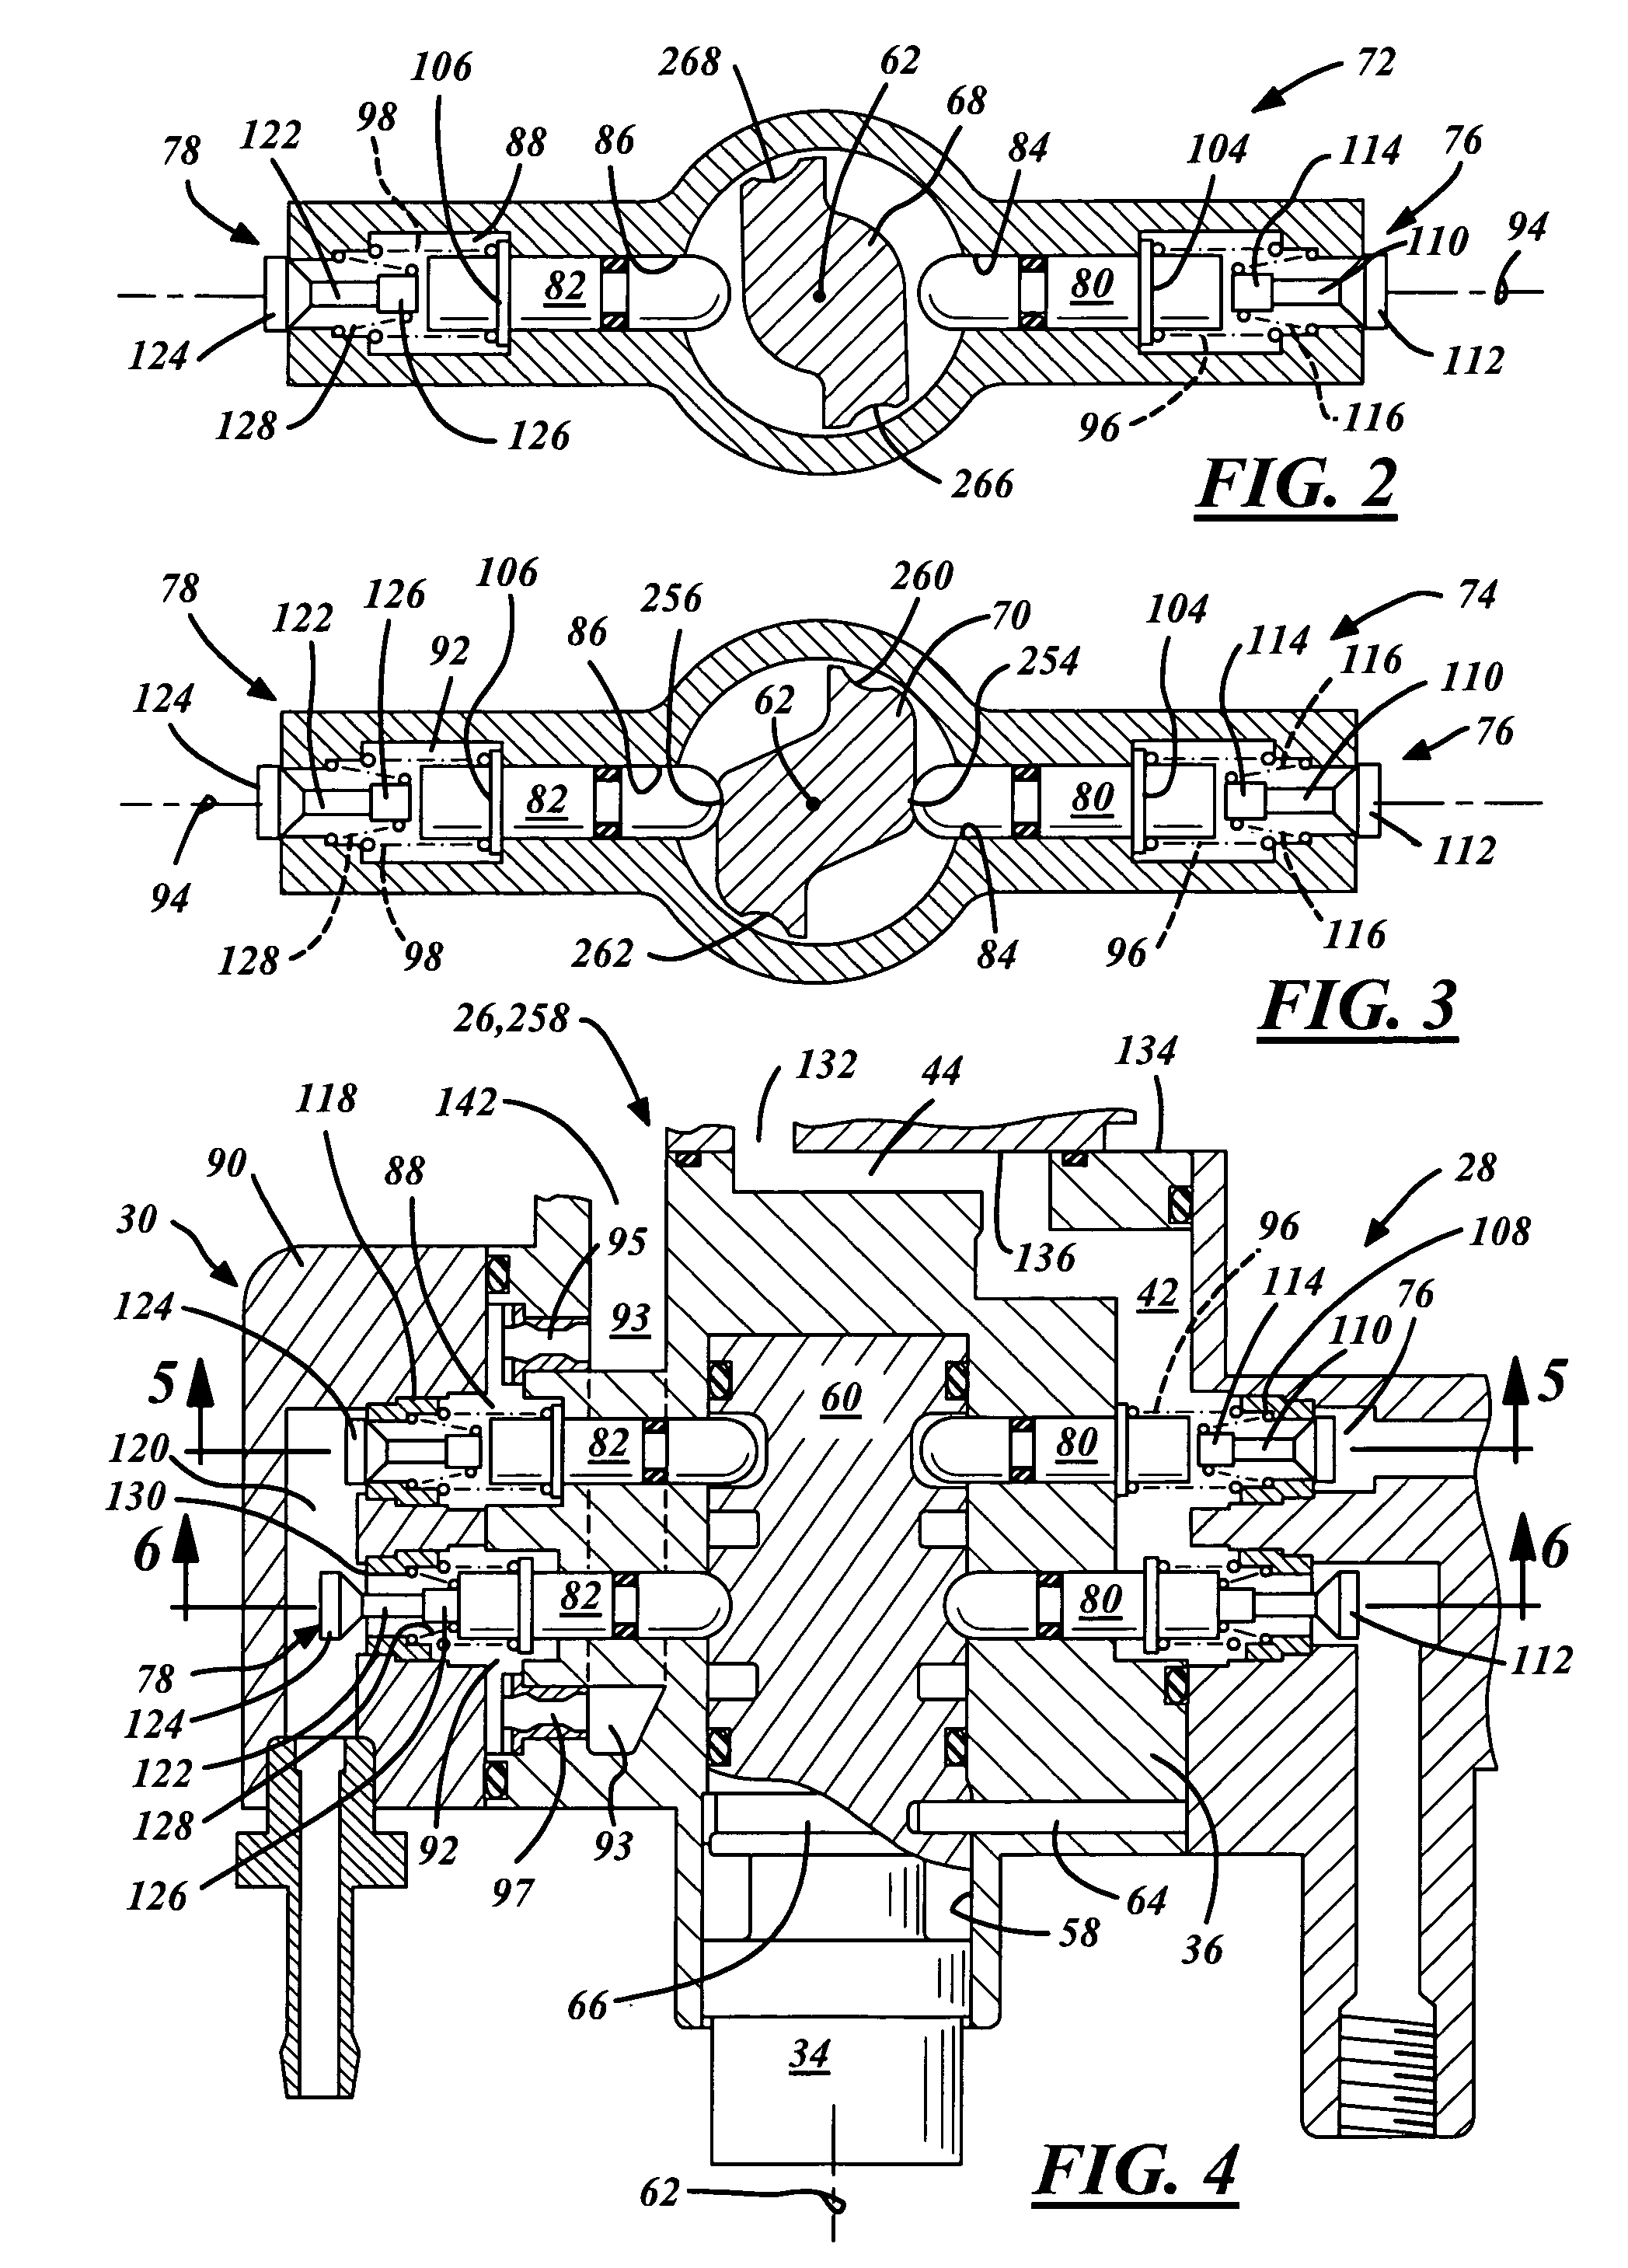 Multi-gaseous fuel control device for a combustion engine with a carburetor